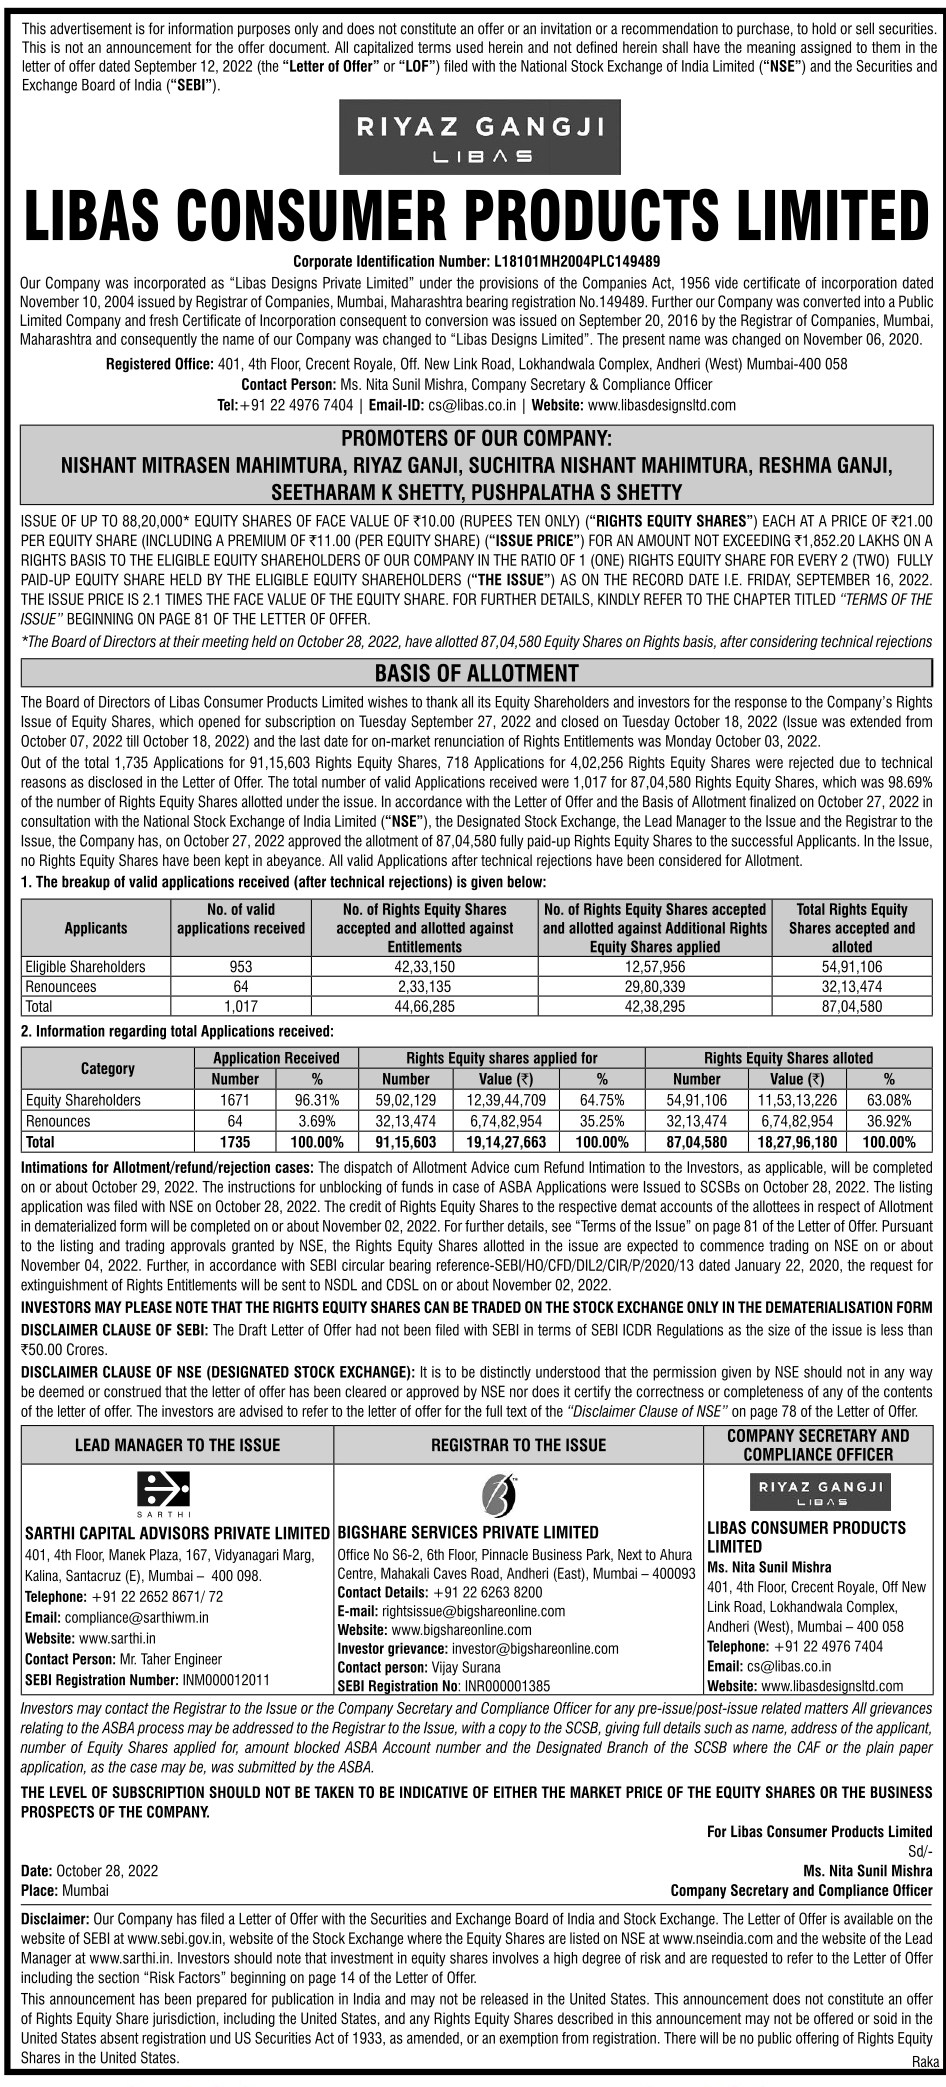 Libas Consumer Products Limited RI Basis of Allotment